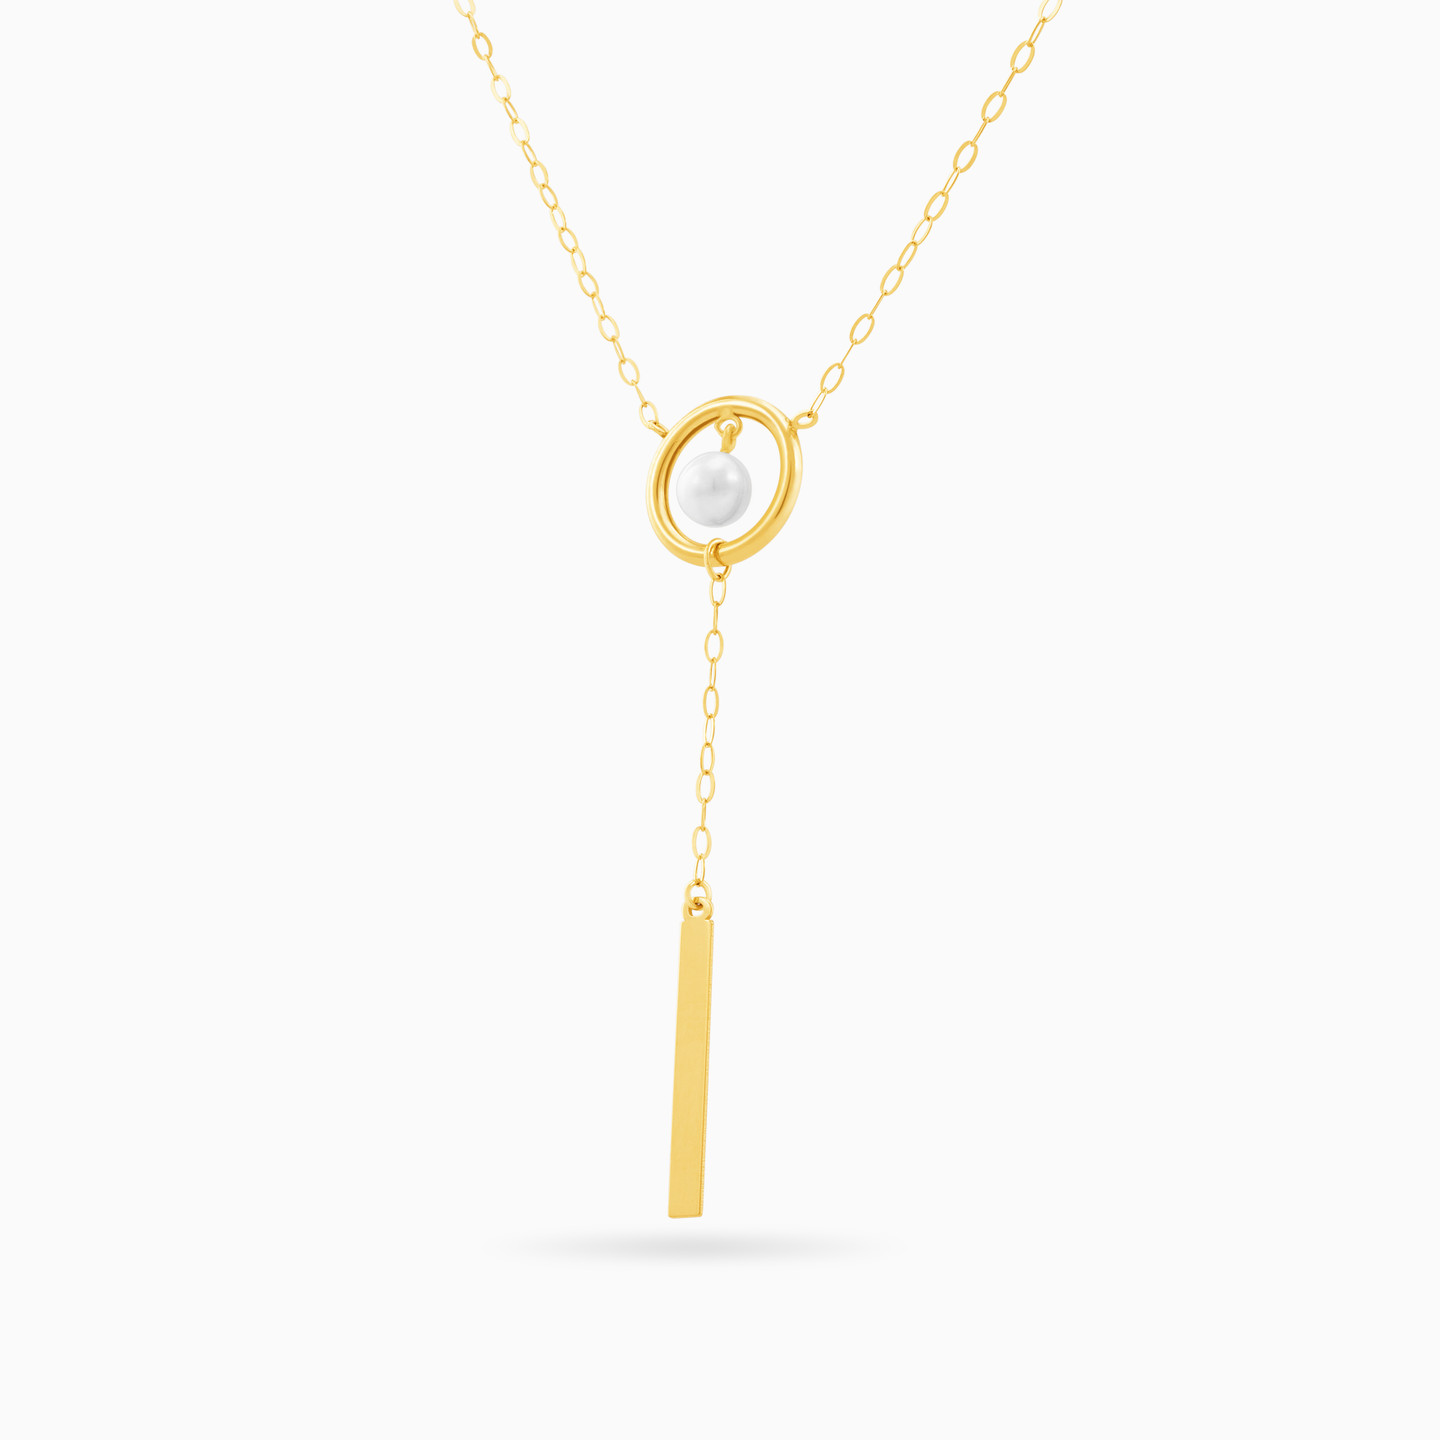 18K Gold Pearl Pendant Necklace - 2